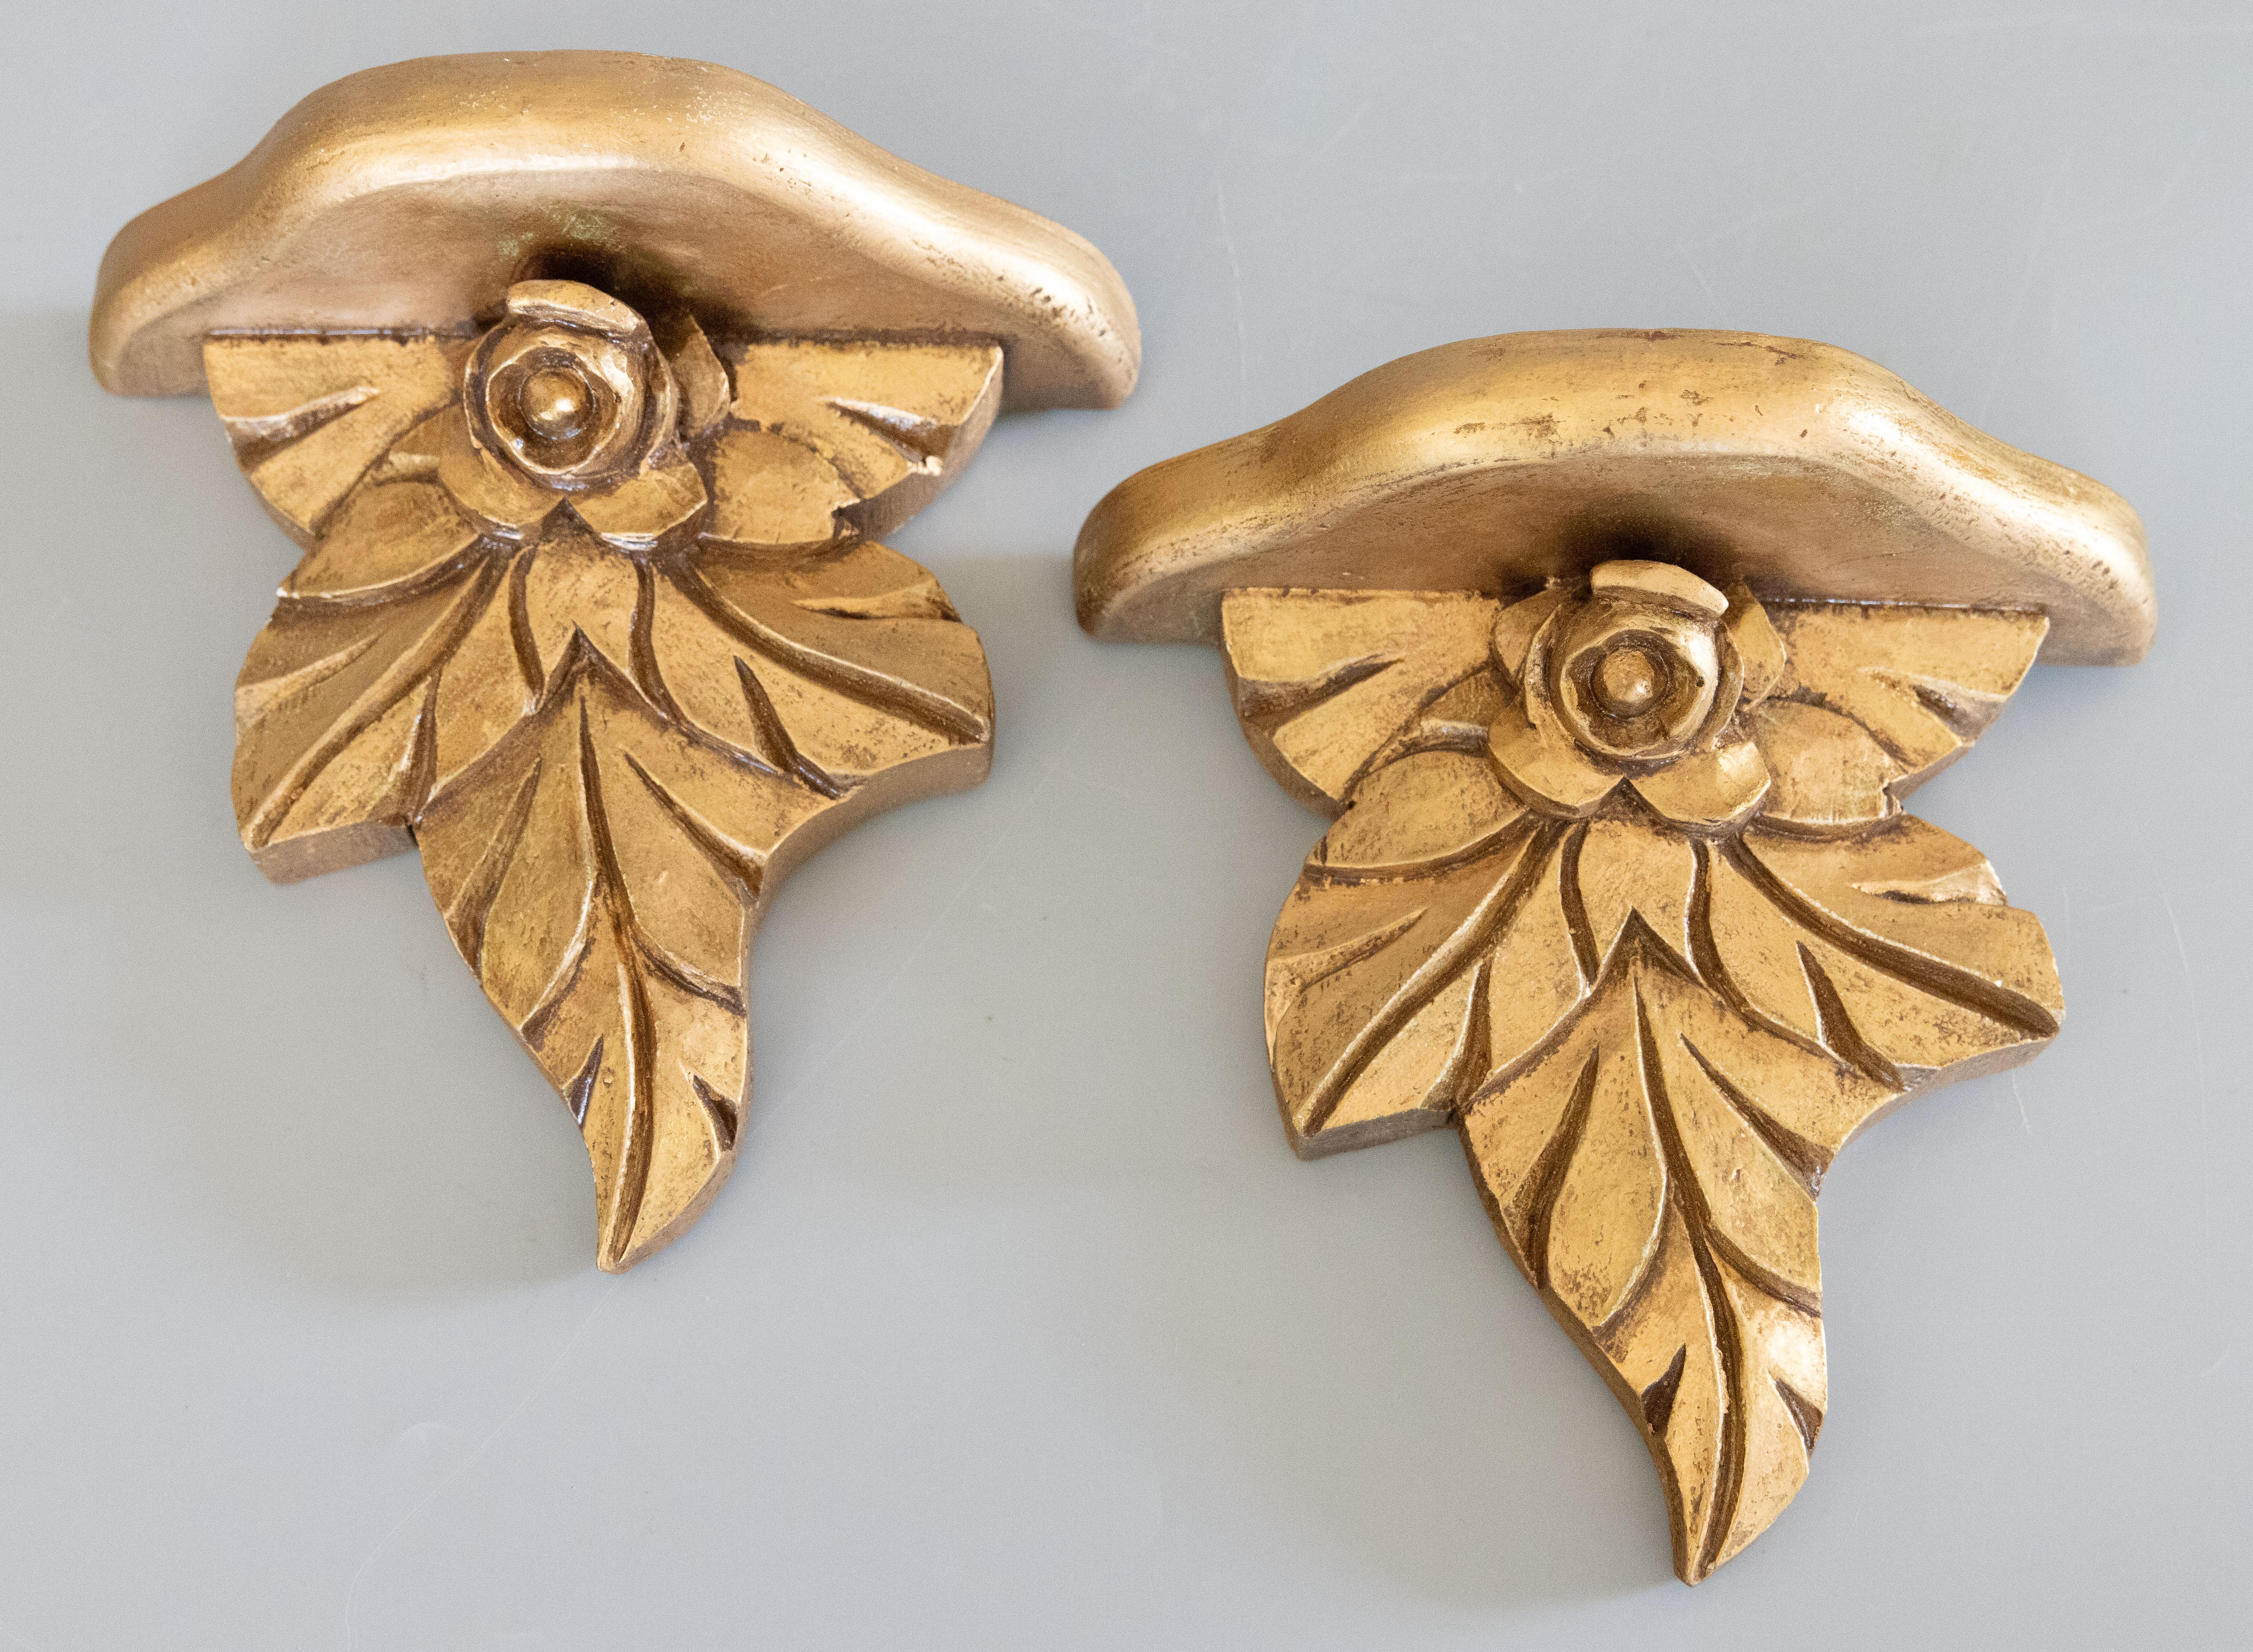 A lovely pair of vintage Mid-Century Italian gilt plaster wall brackets shelves. They are decorated with lovely roses in a beautiful gilt patina, perfect for displaying decorative collectibles or fabulous on their own.

DIMENSIONS
7.5ʺW × 3.25ʺD ×